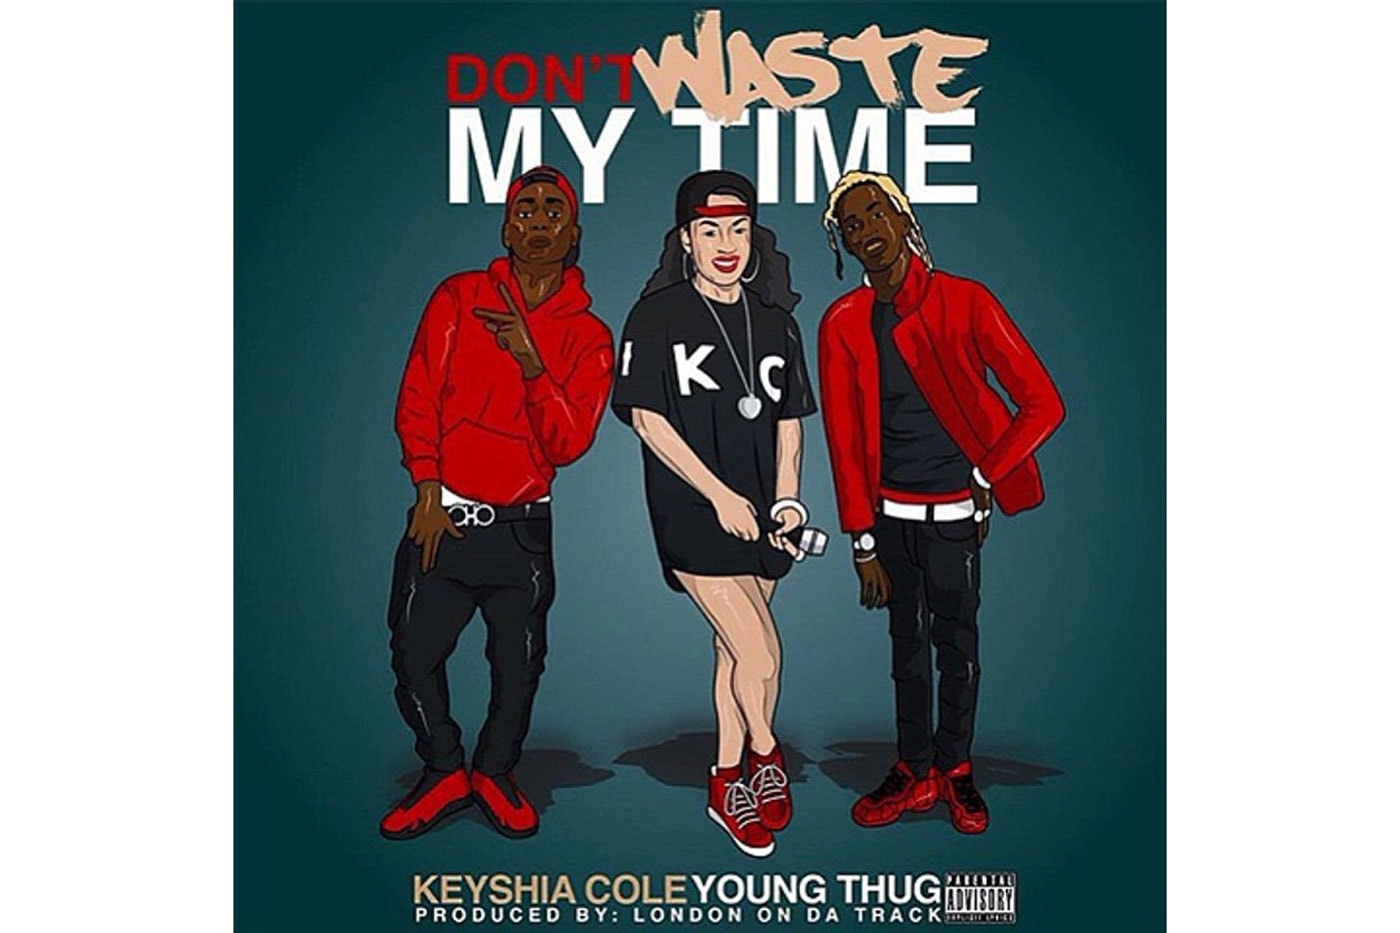 Keyshia Cole featuring Young Thug - Don’t Waste My Time